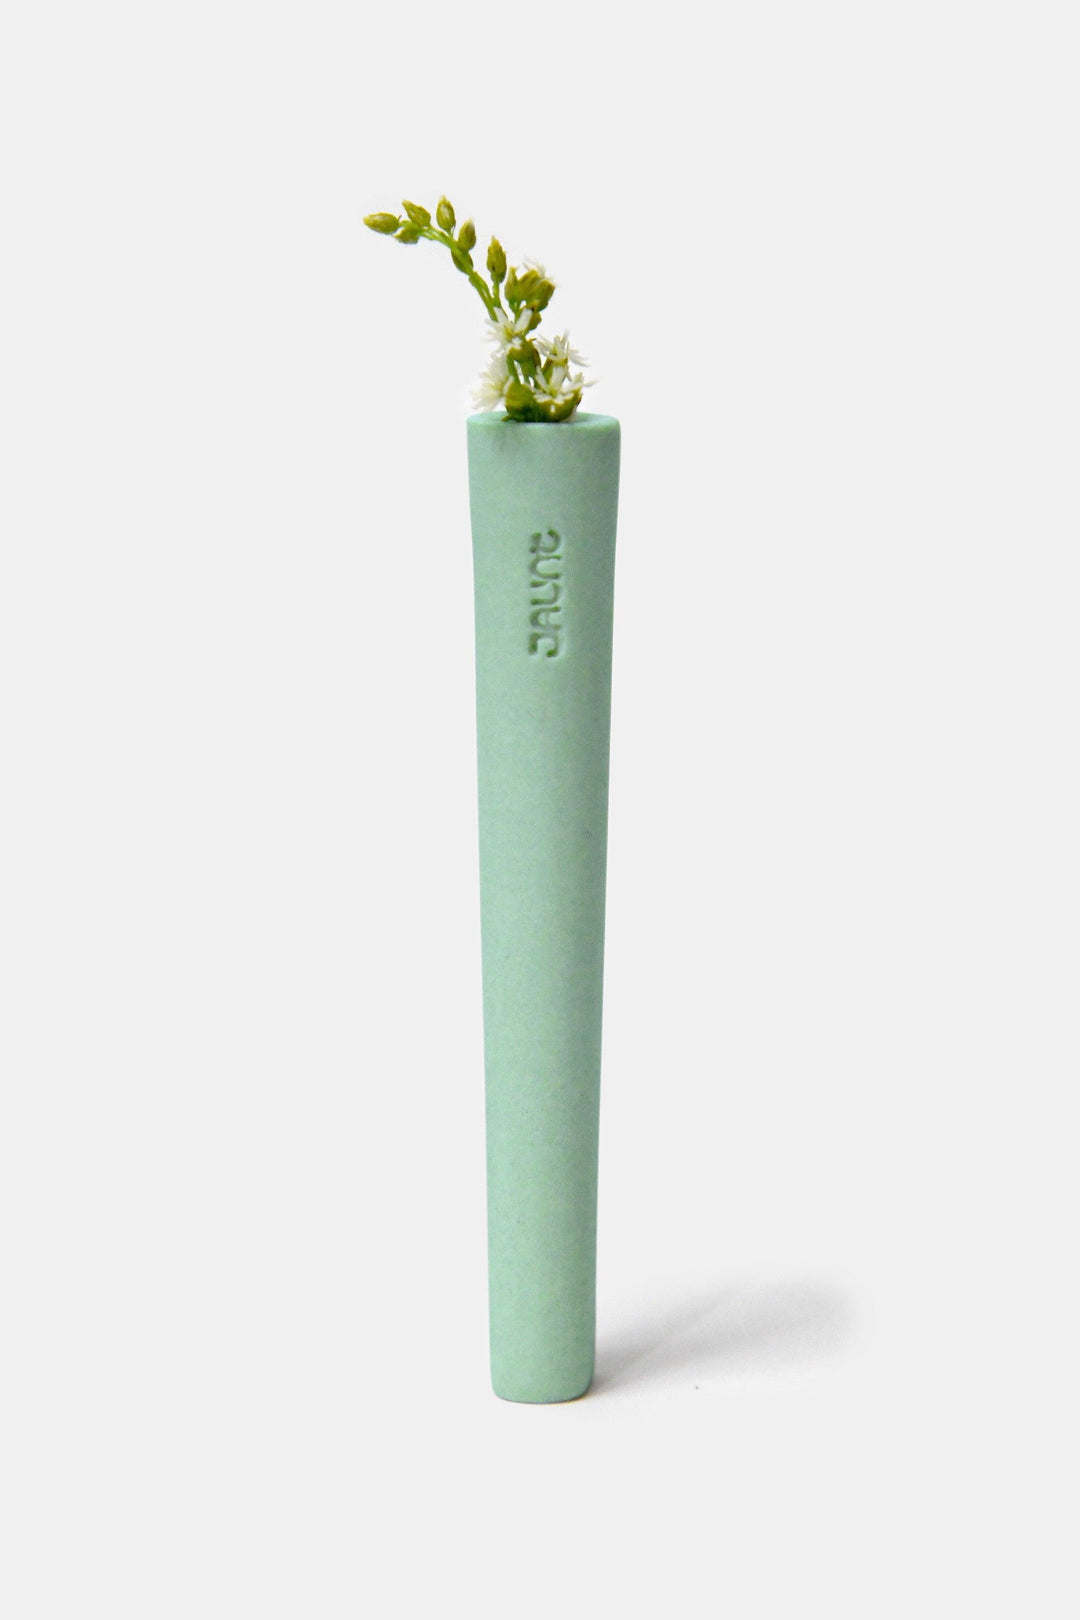 Cannabis one-hitter ceramic pipe in mint green.